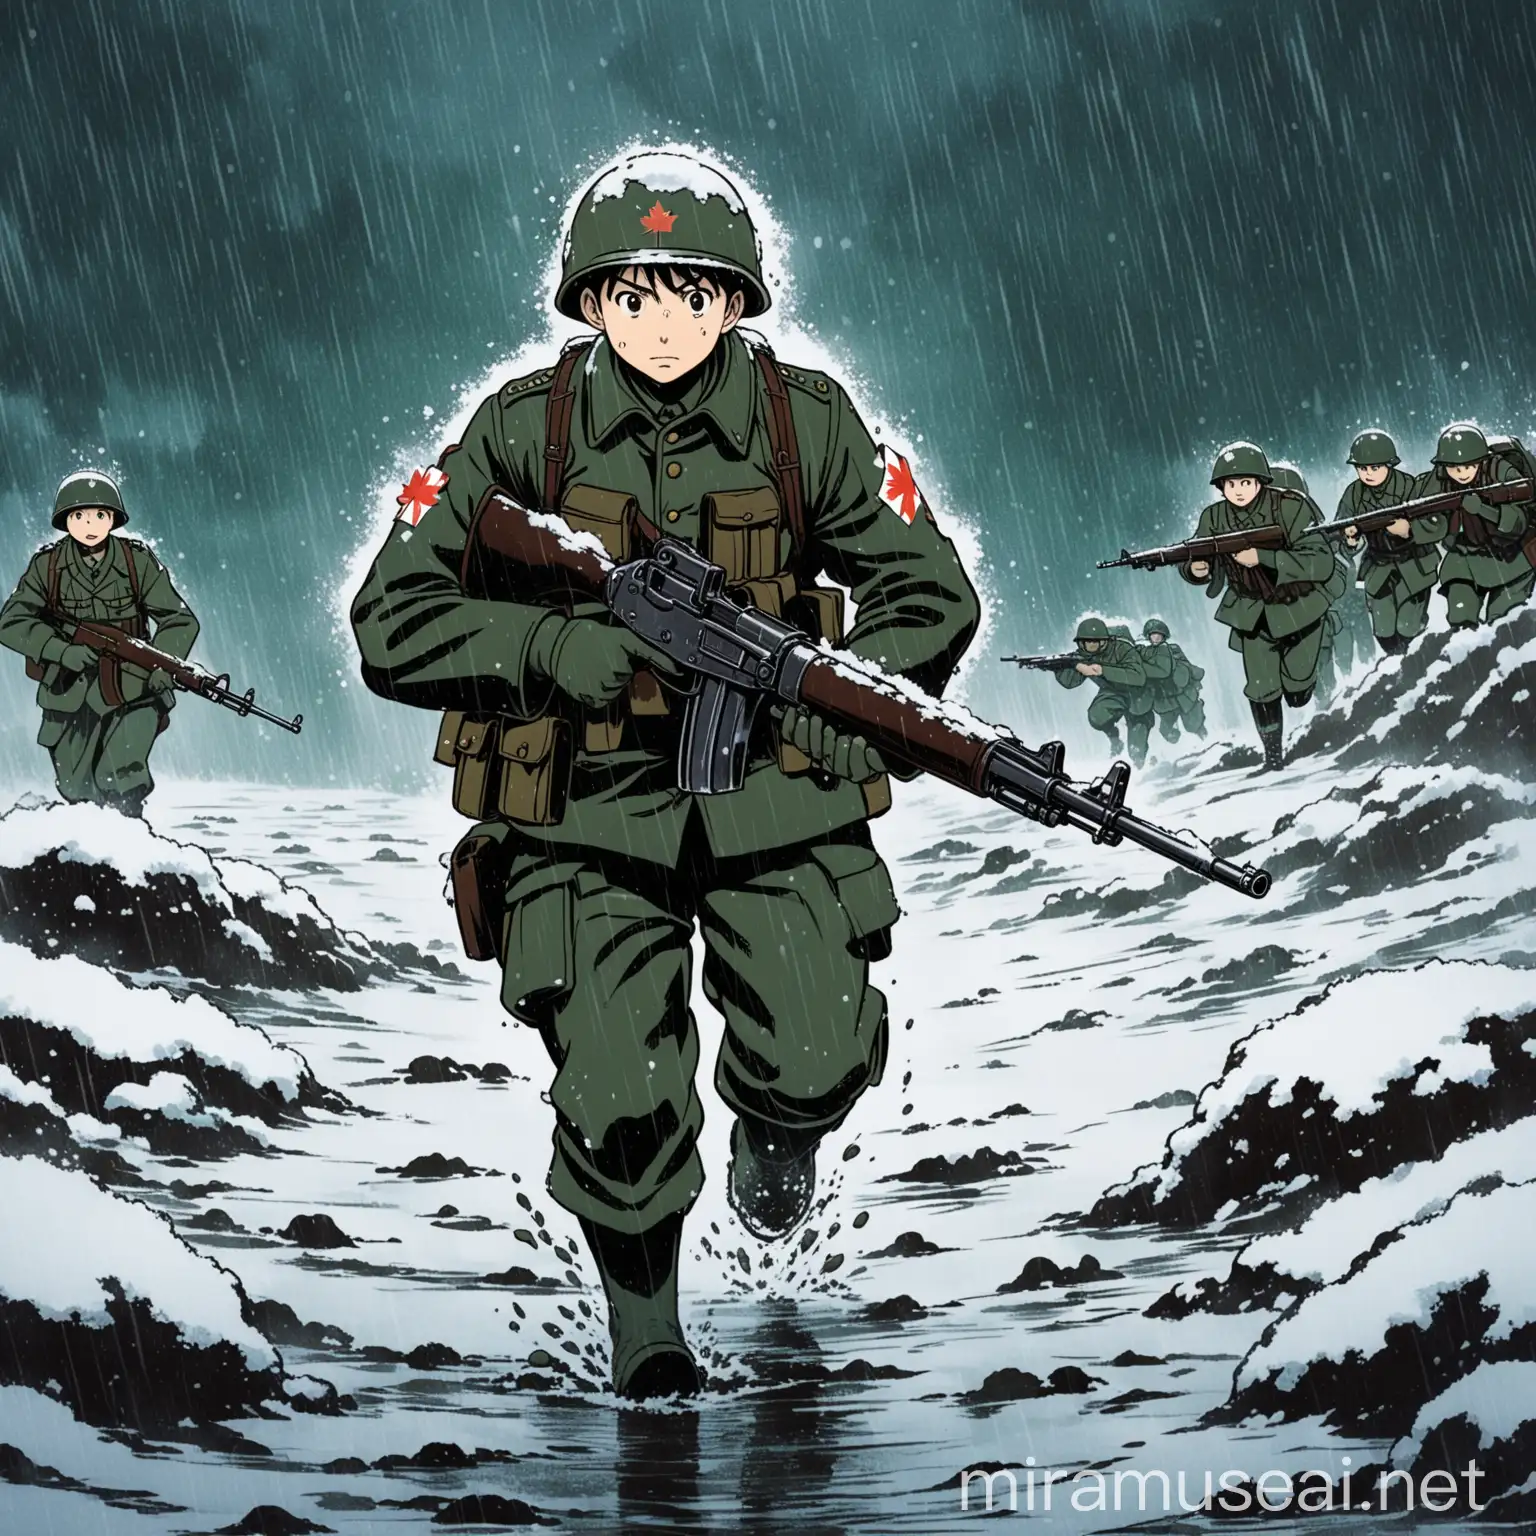 Canada as anime soldier.Studio ghibli vibe,old style anime.Aesthatic,He has gun.Snowy,rainy weather,ground is mud.He has world war 2 armor .He is rushing to enemy line,Studio ghibli detailed.Dramatic,dark atmosphere.Background some soldiers fall down.War images